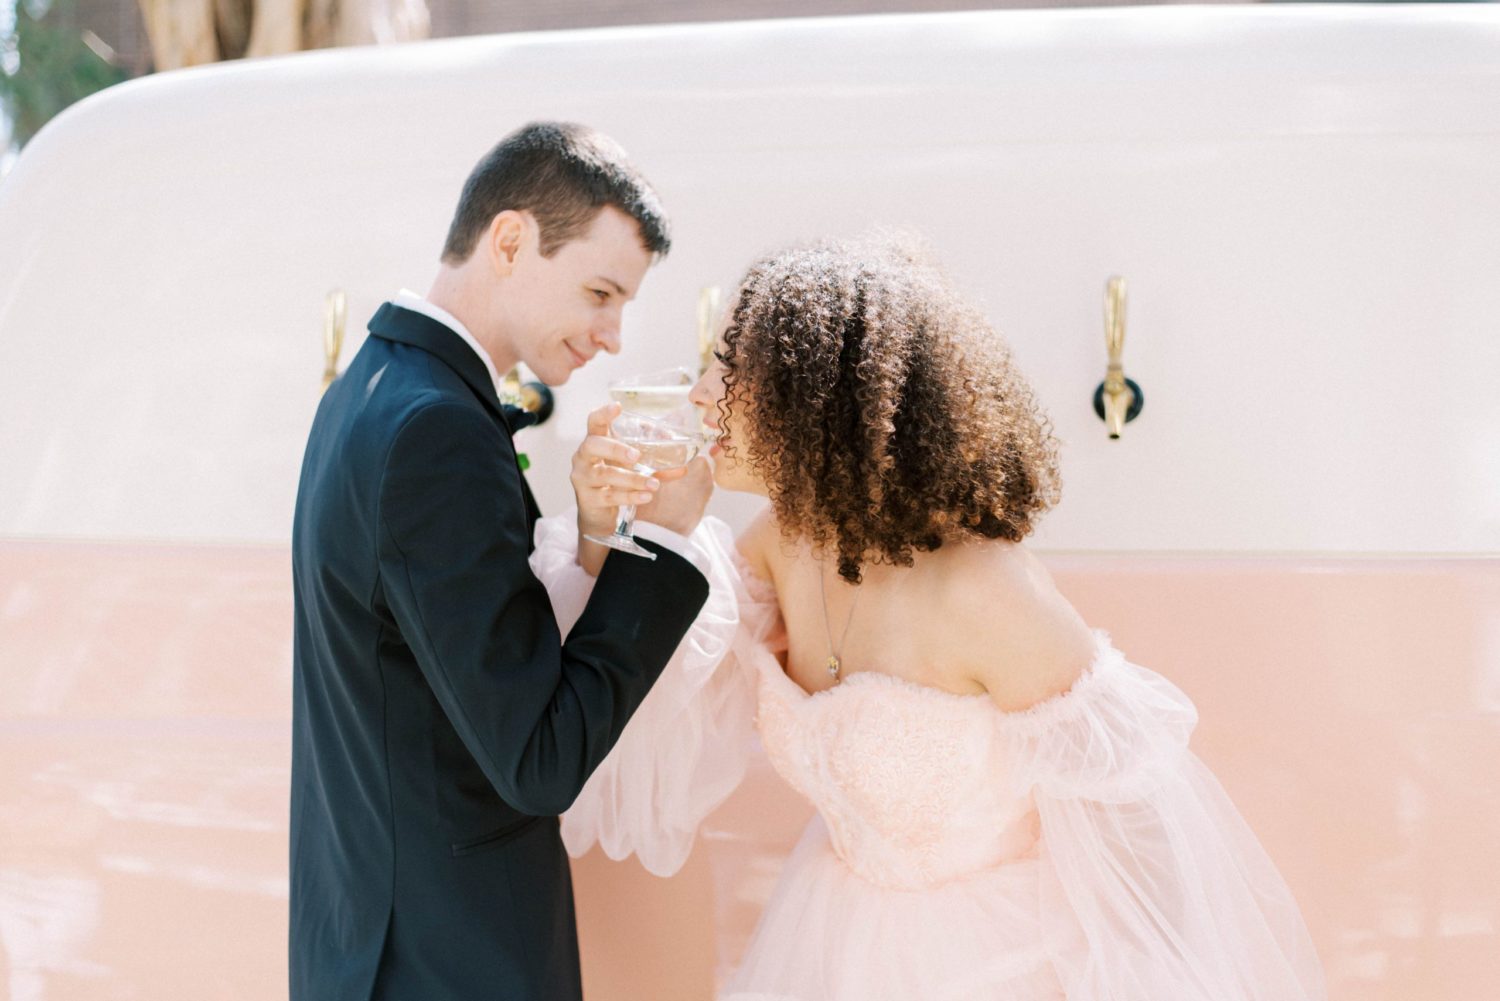 Wedding Photography Timeline Tips to ensure nothing gets missed bride and groom drinking champagne by bar smiling at each other groom wearing black tuxedo and bride wearing pink wedding gown